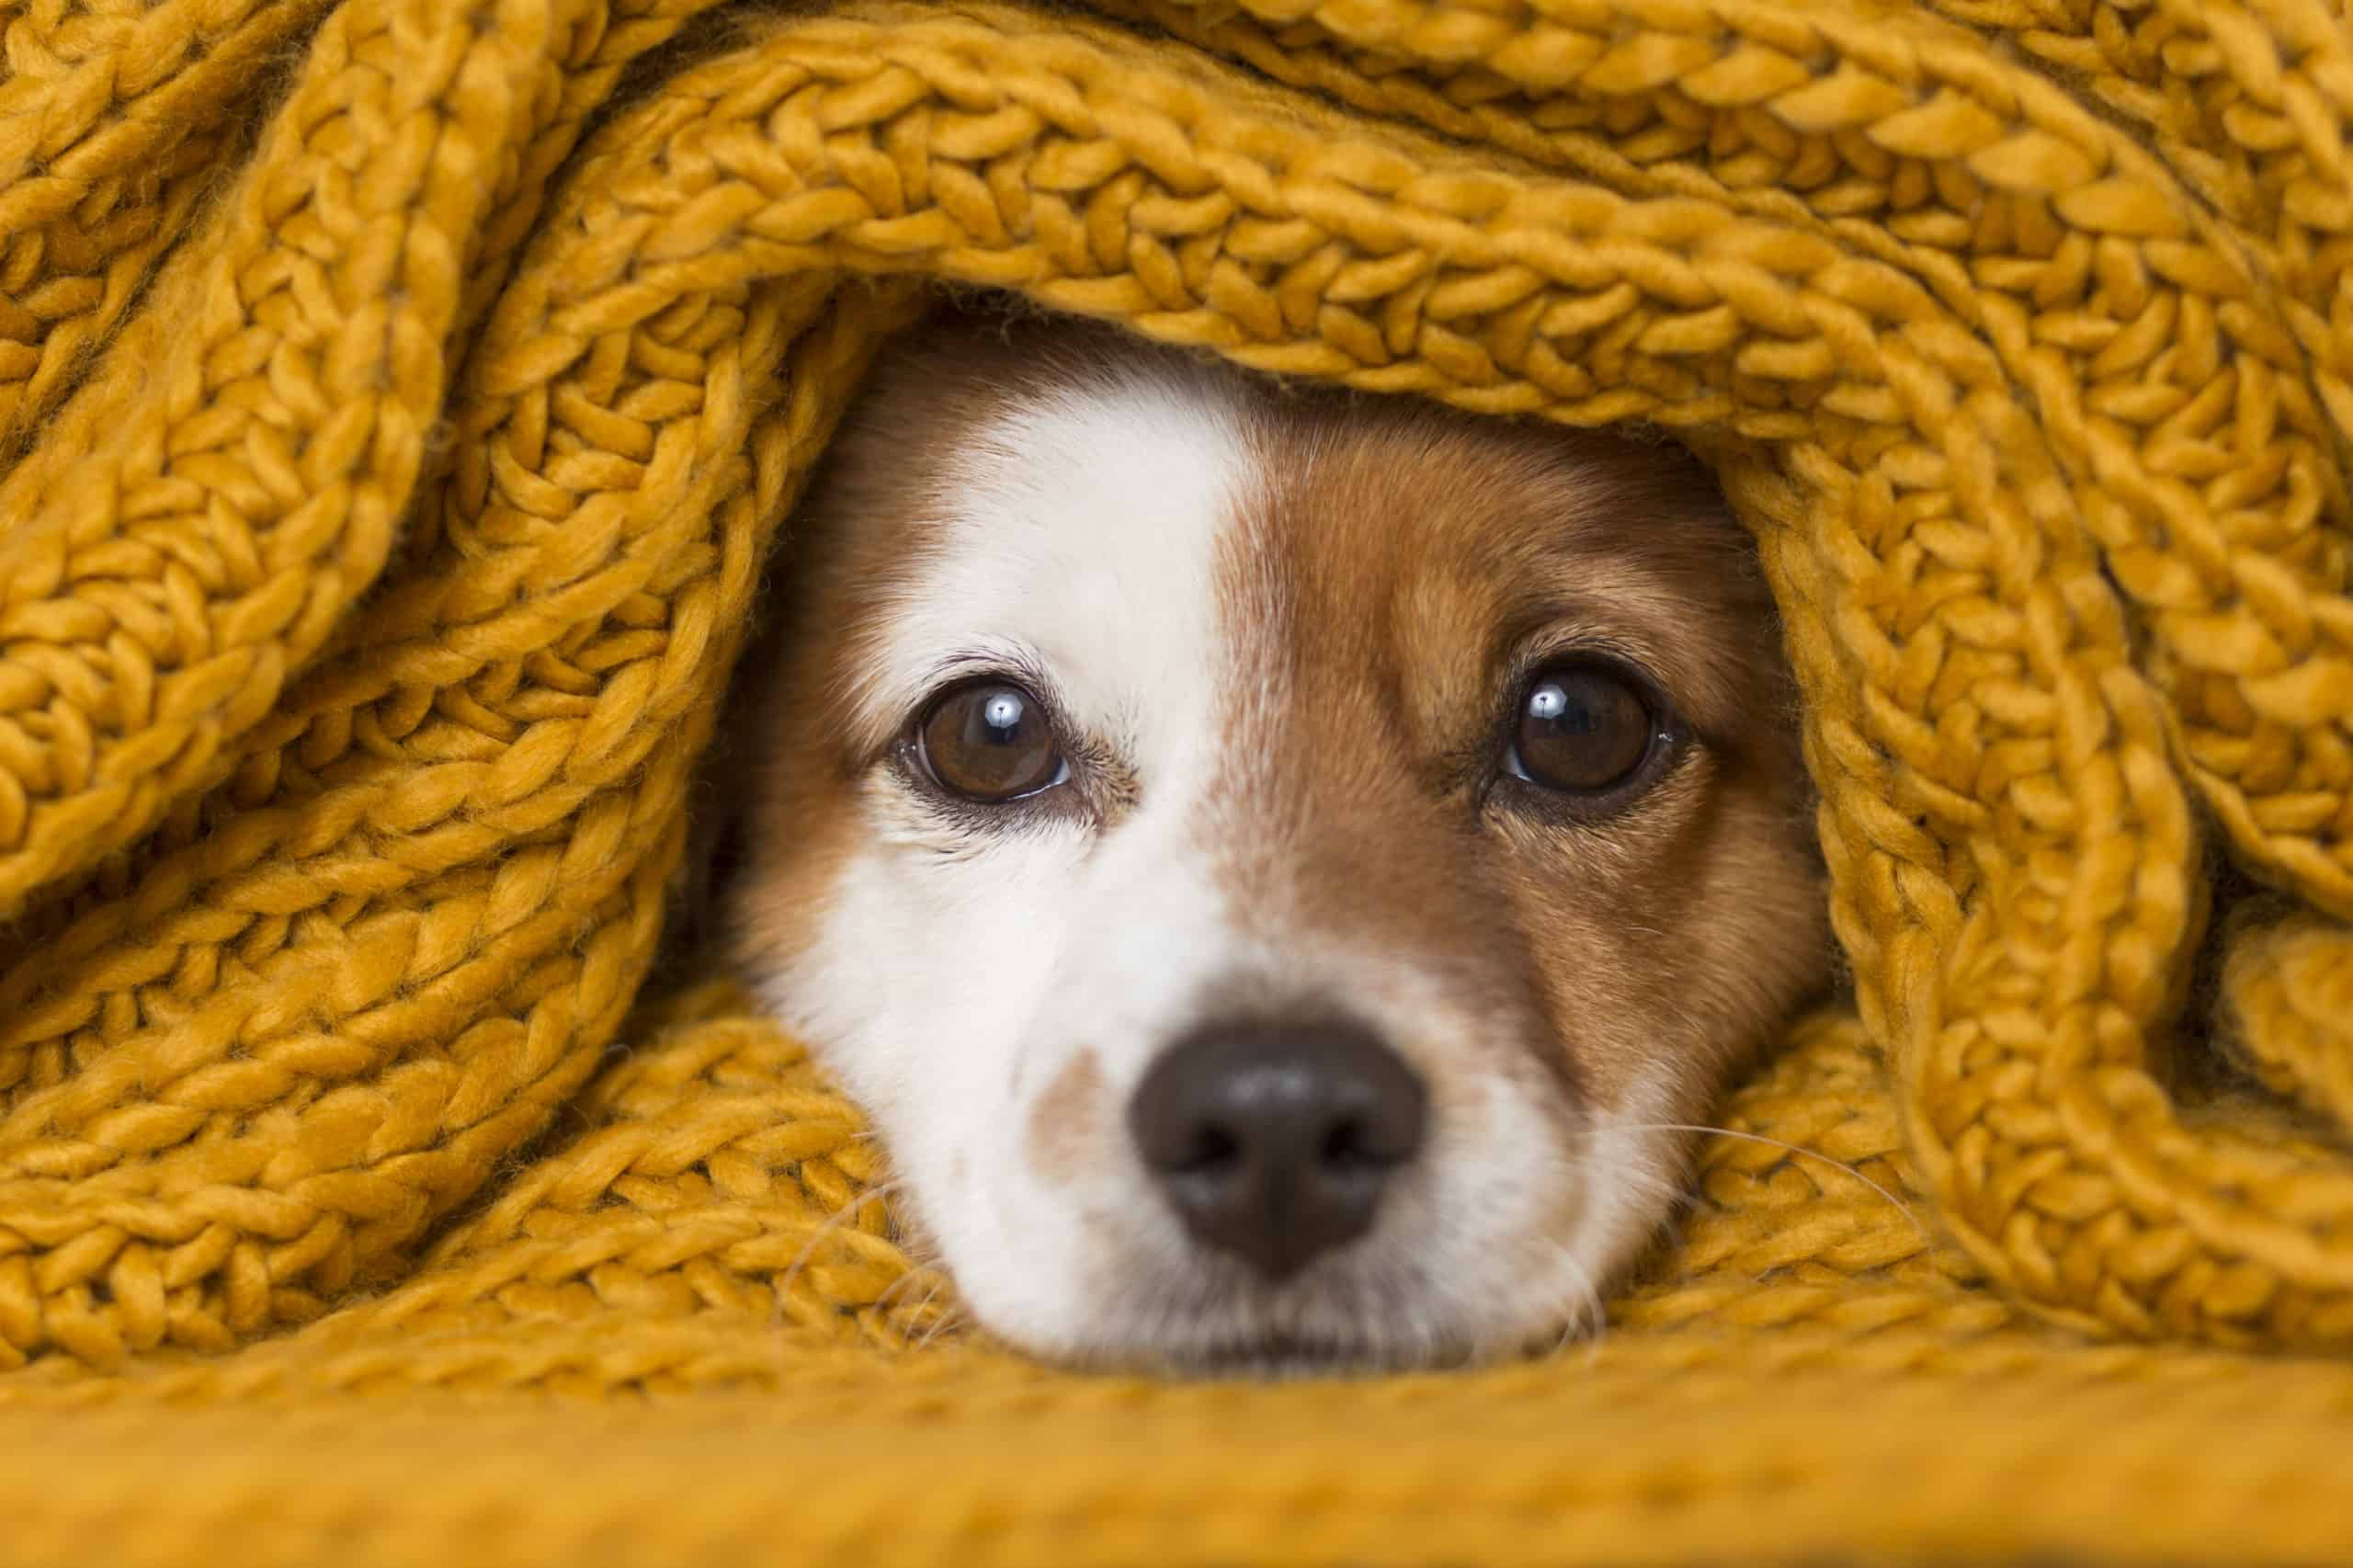 Why does my dog nibble blankets?